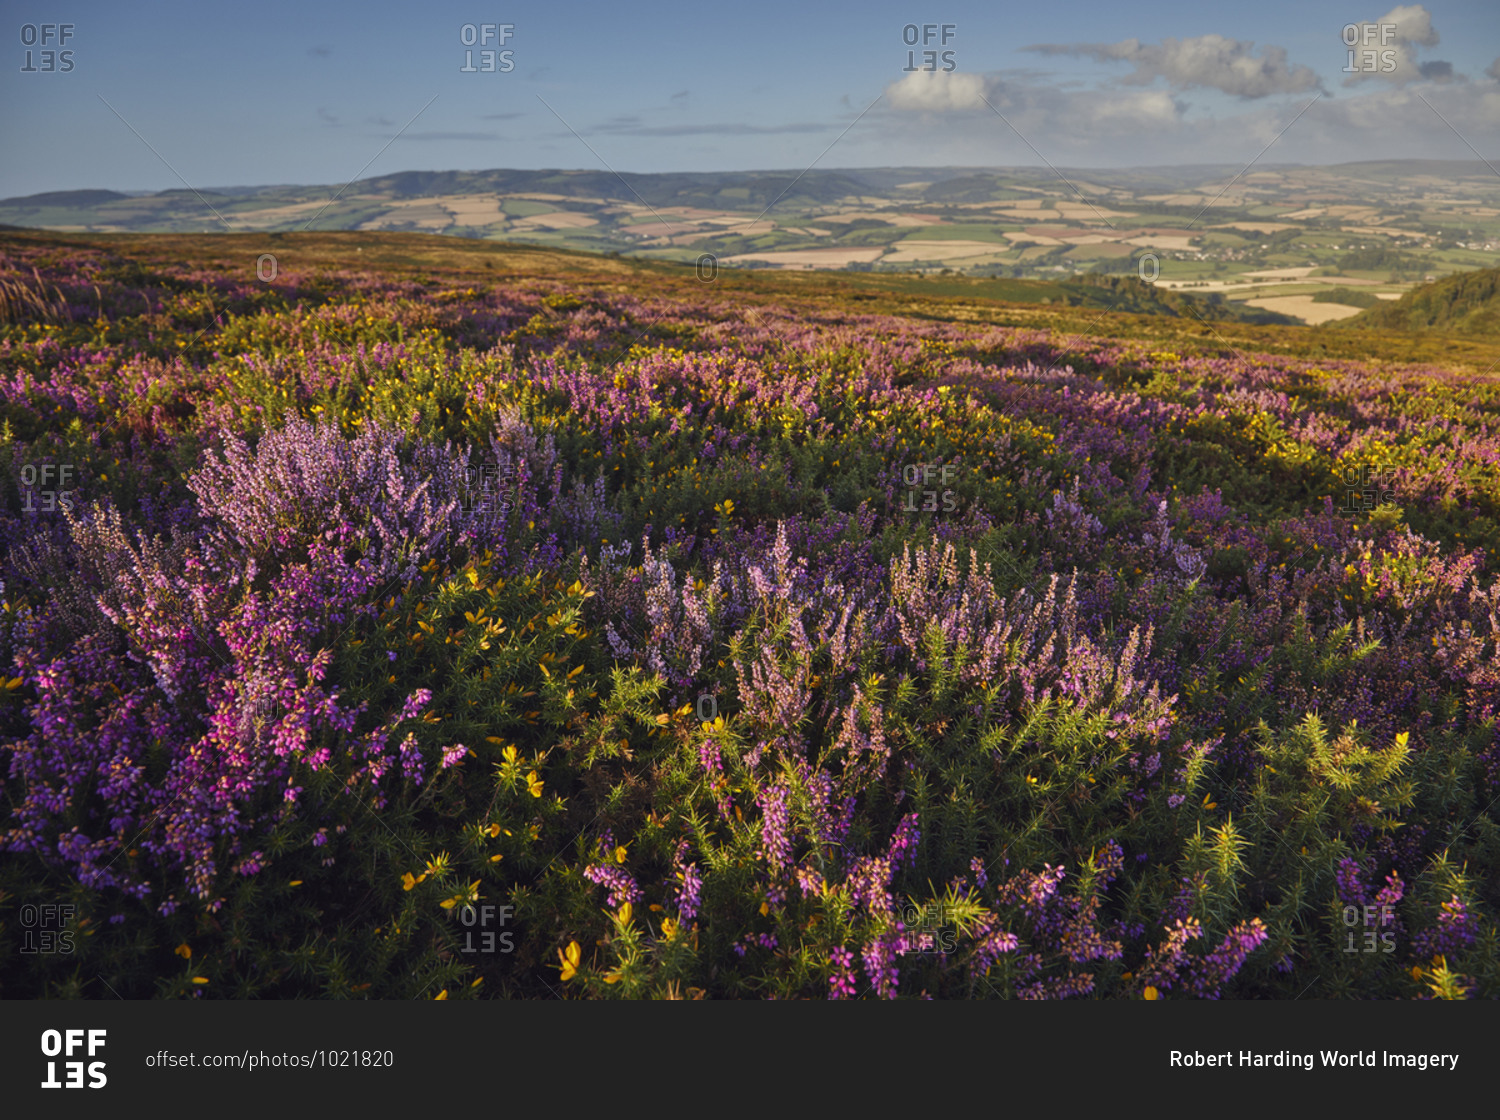 Heather in flower on moorland on Beacon Hill, in the Quantock Hills Area of Outstanding Natural Beauty, Somerset, England, United Kingdom, Europe